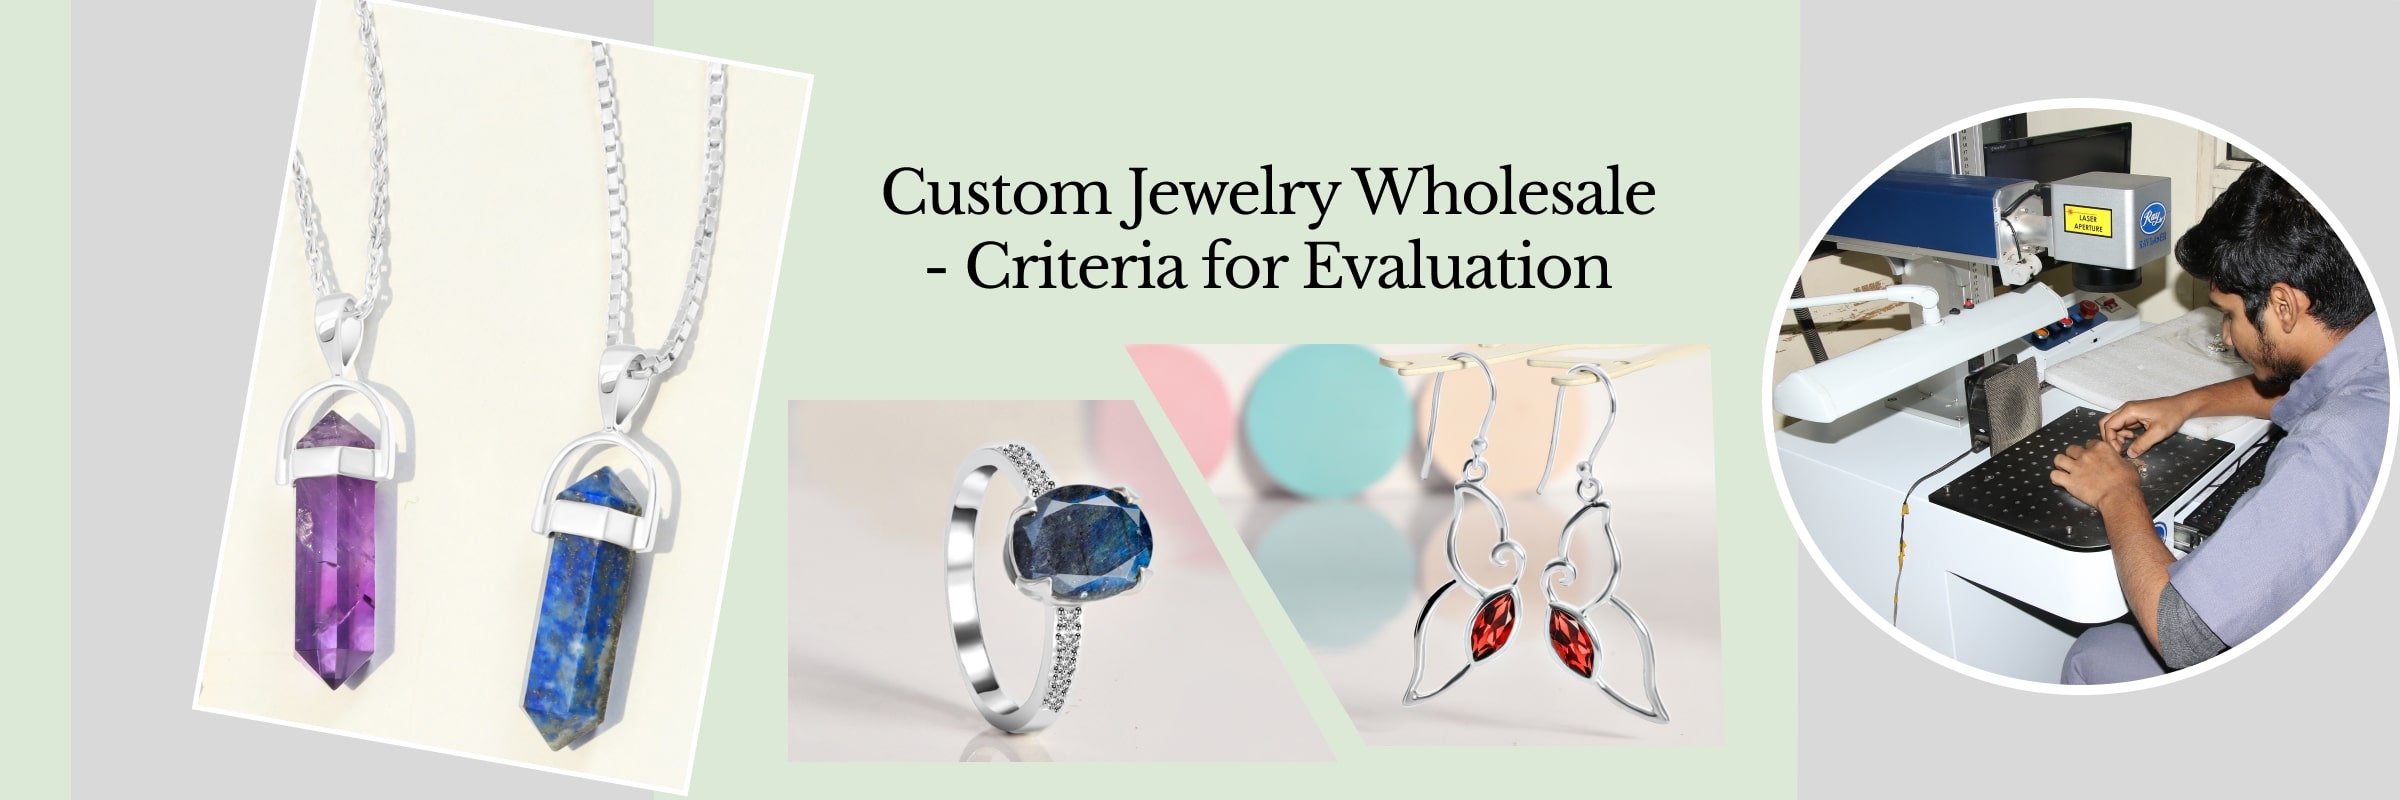 Things to Search For in a Custom Jewelry Wholesale Business